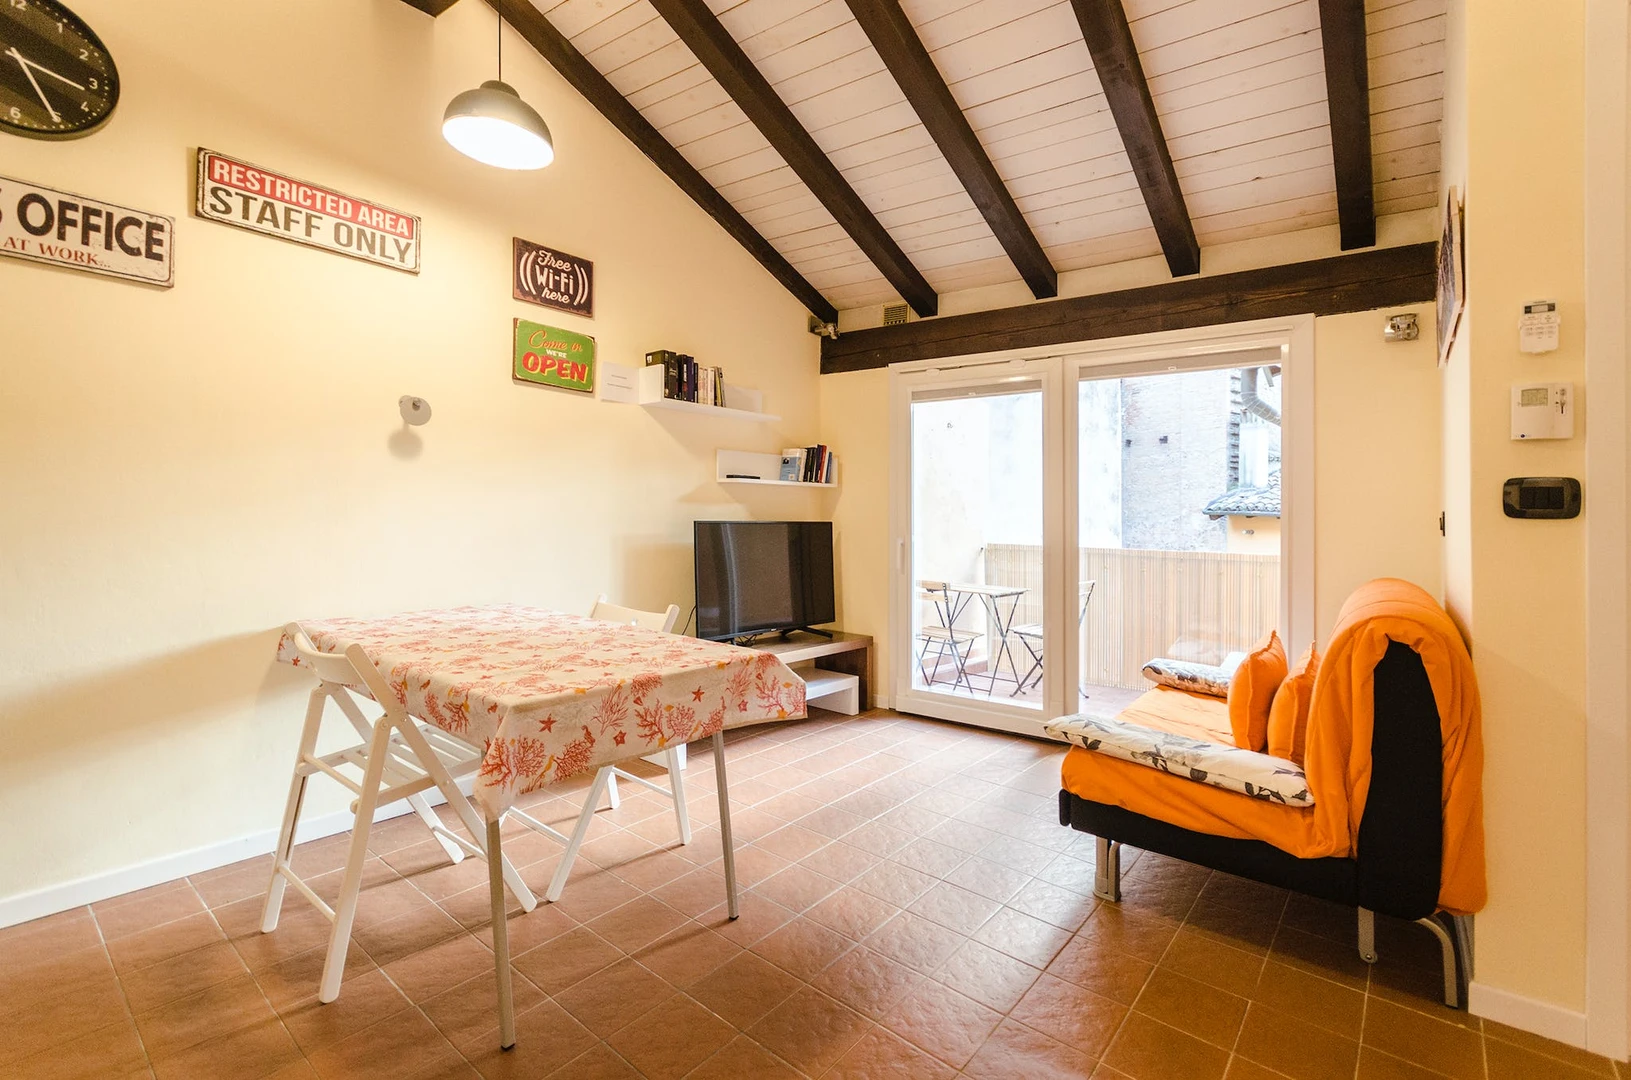 Accommodation in the centre of bologna